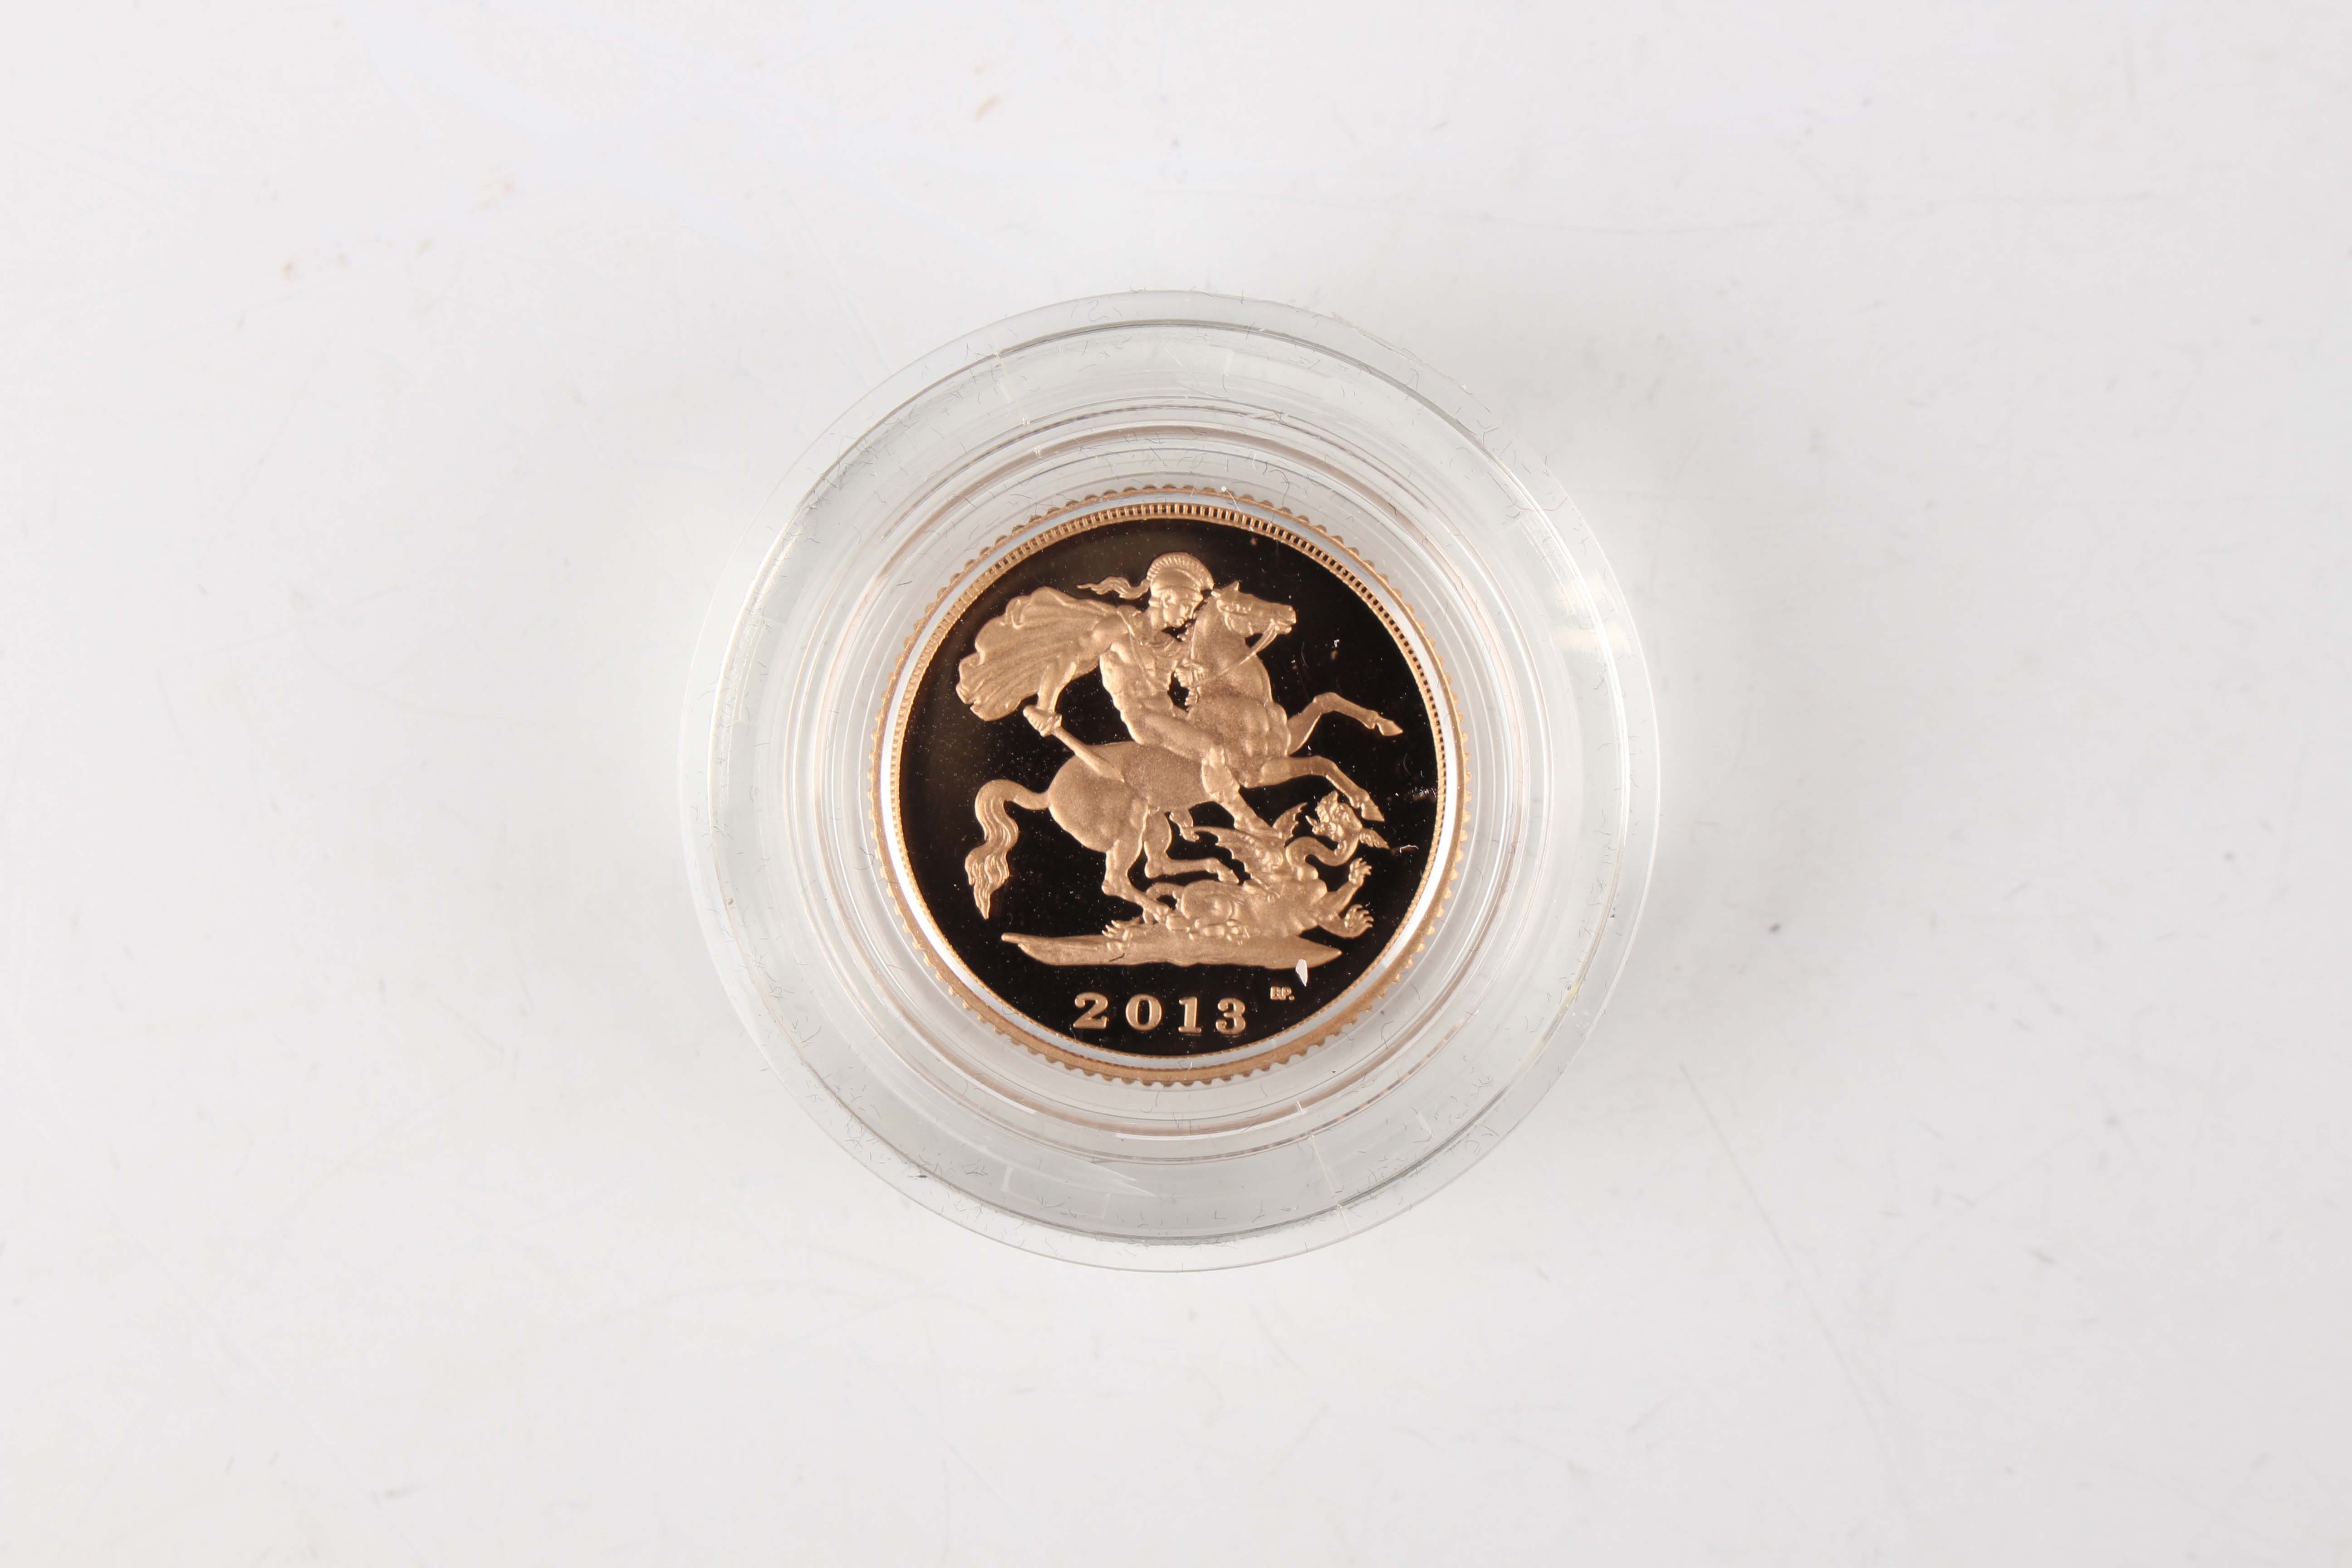 An Elizabeth II Royal Mint sovereign four-coin set 2013 commemorating the 60th Anniversary of the - Image 5 of 9